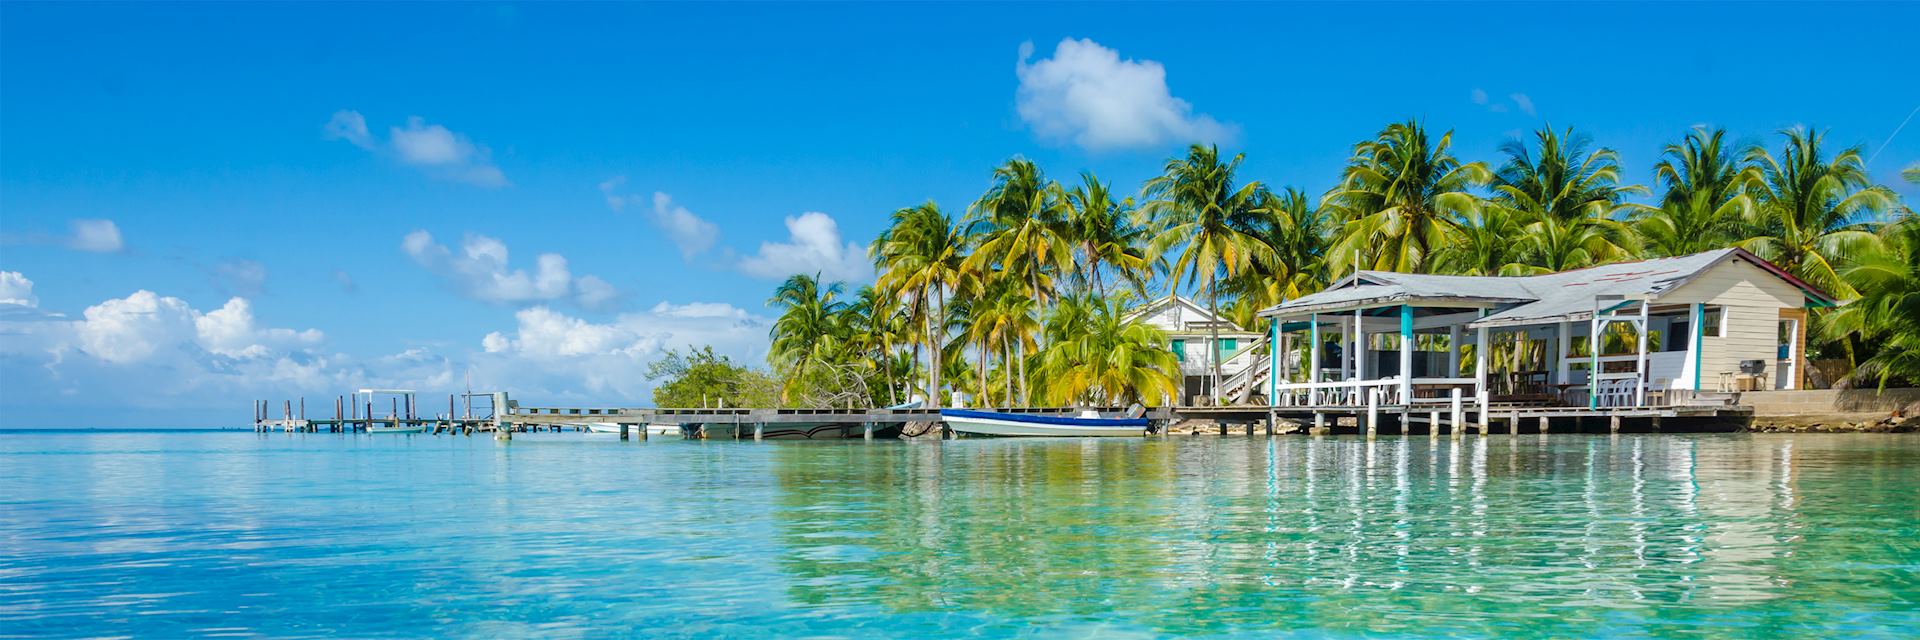 Clear waters of Ambergris Caye